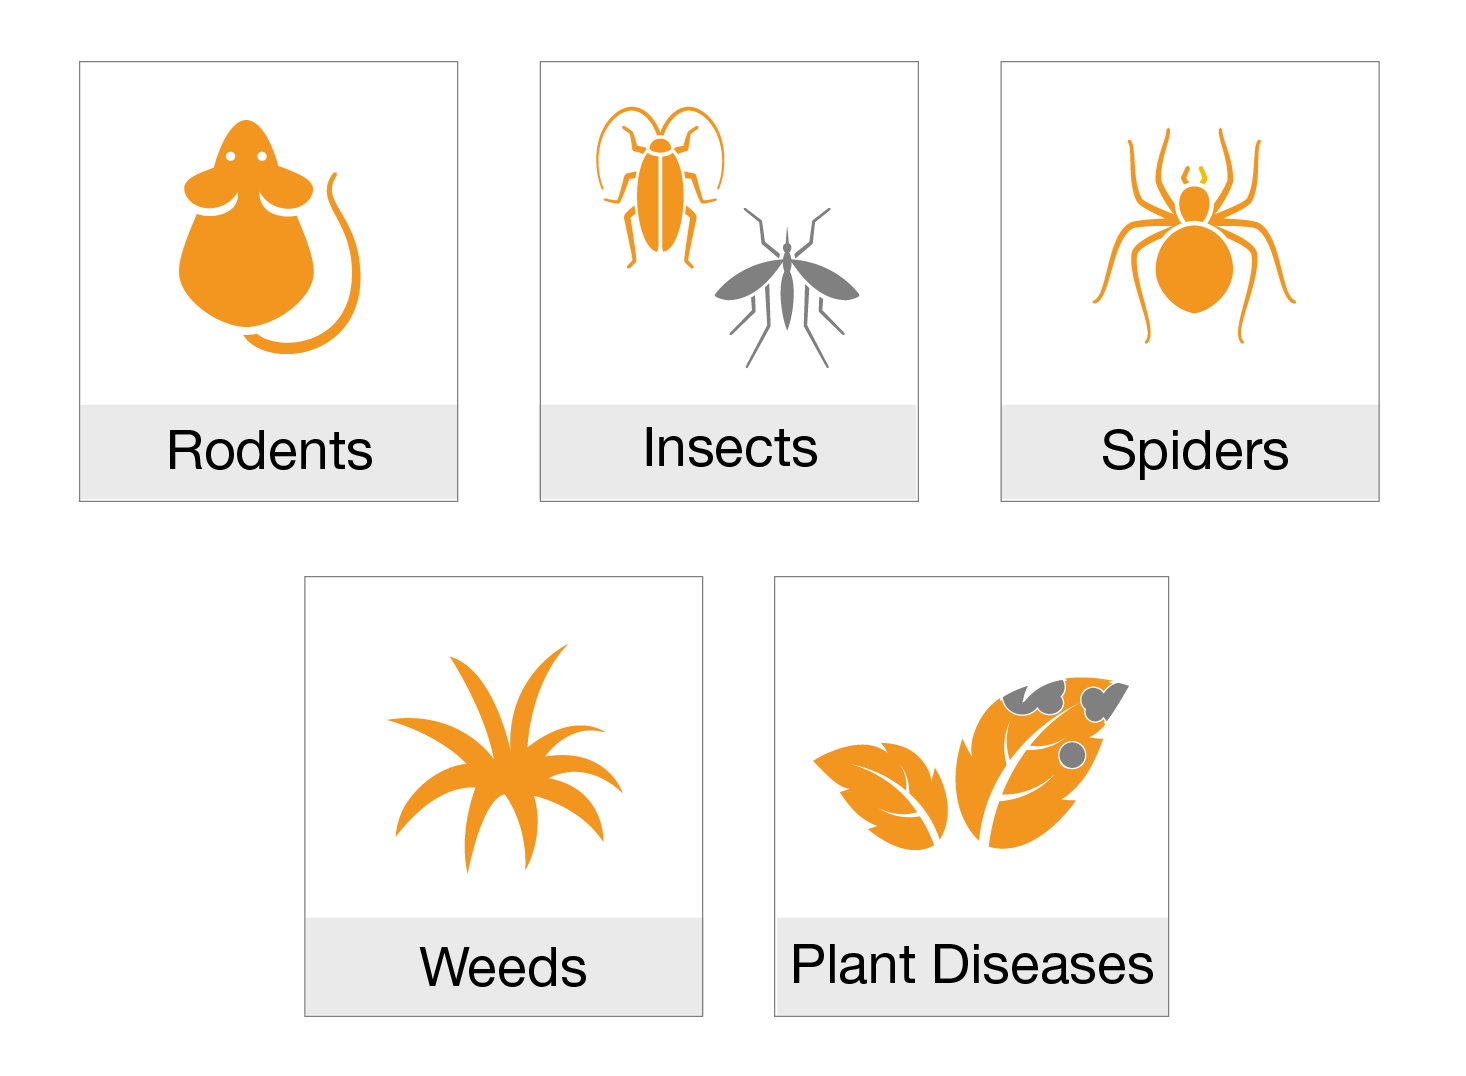 Images showing rodent, insects, spider, weed, and diseased plants